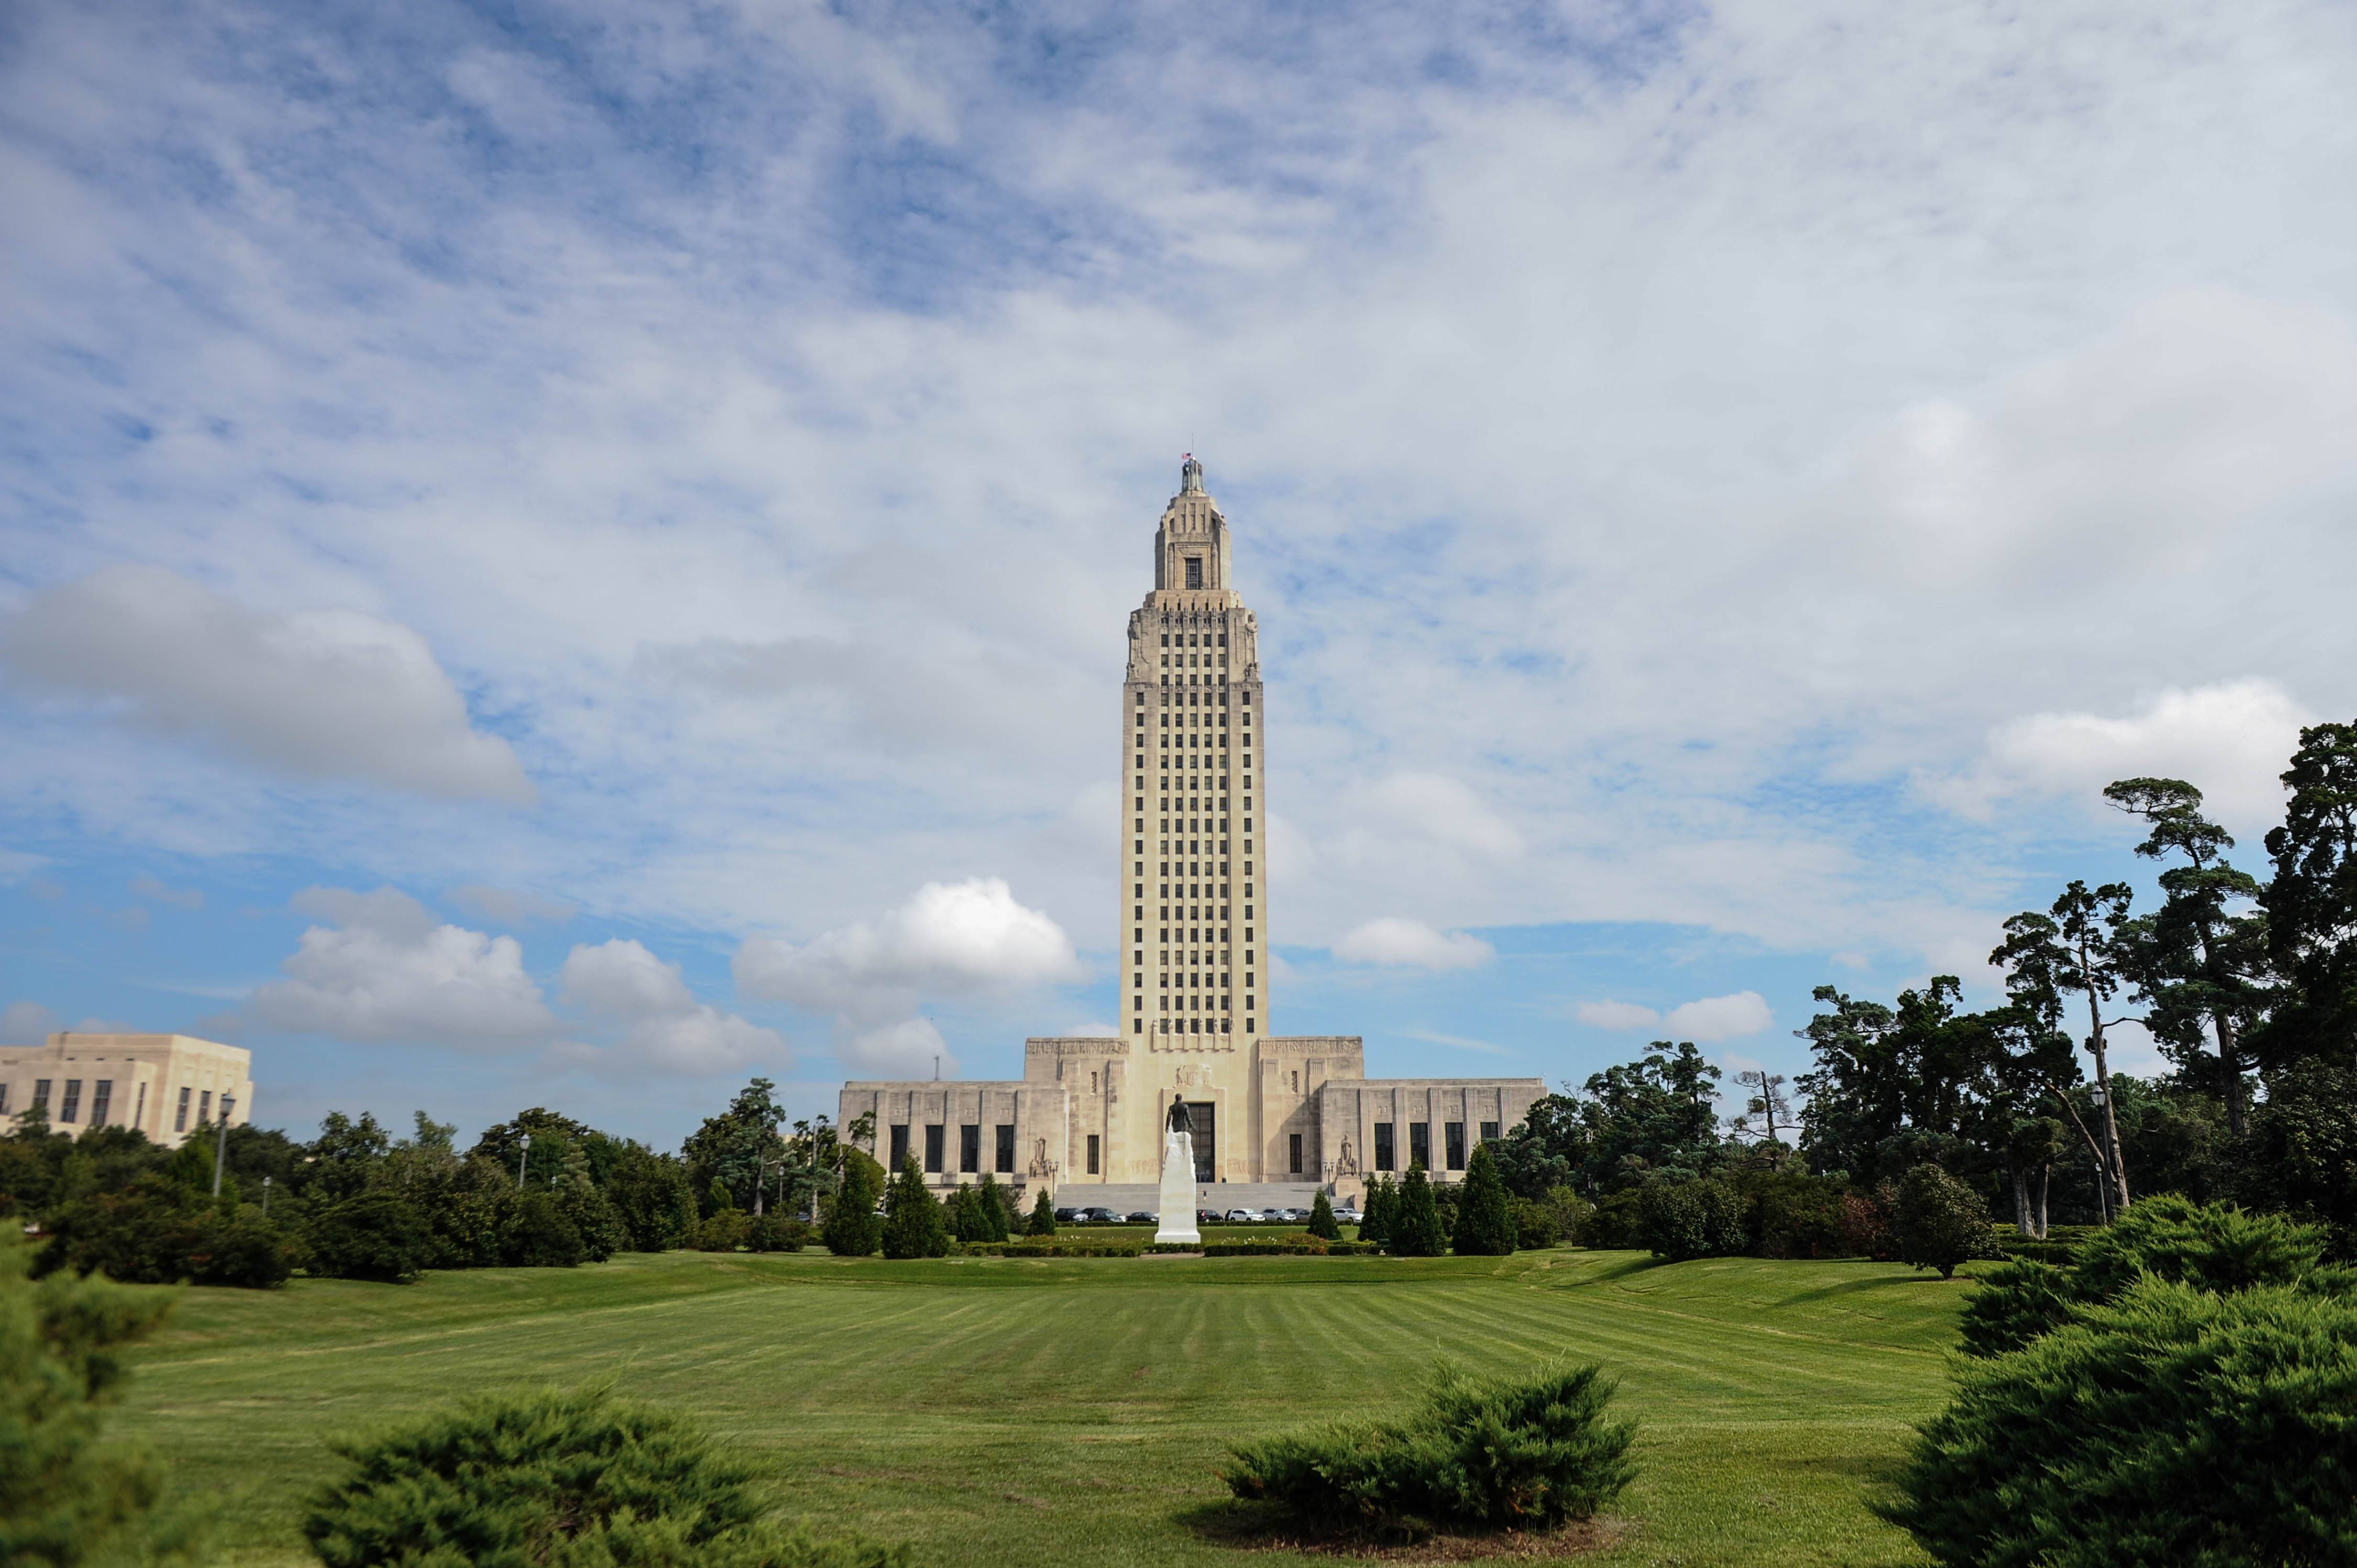 louisiana state capitol and grounds - visit baton rouge photos (4)